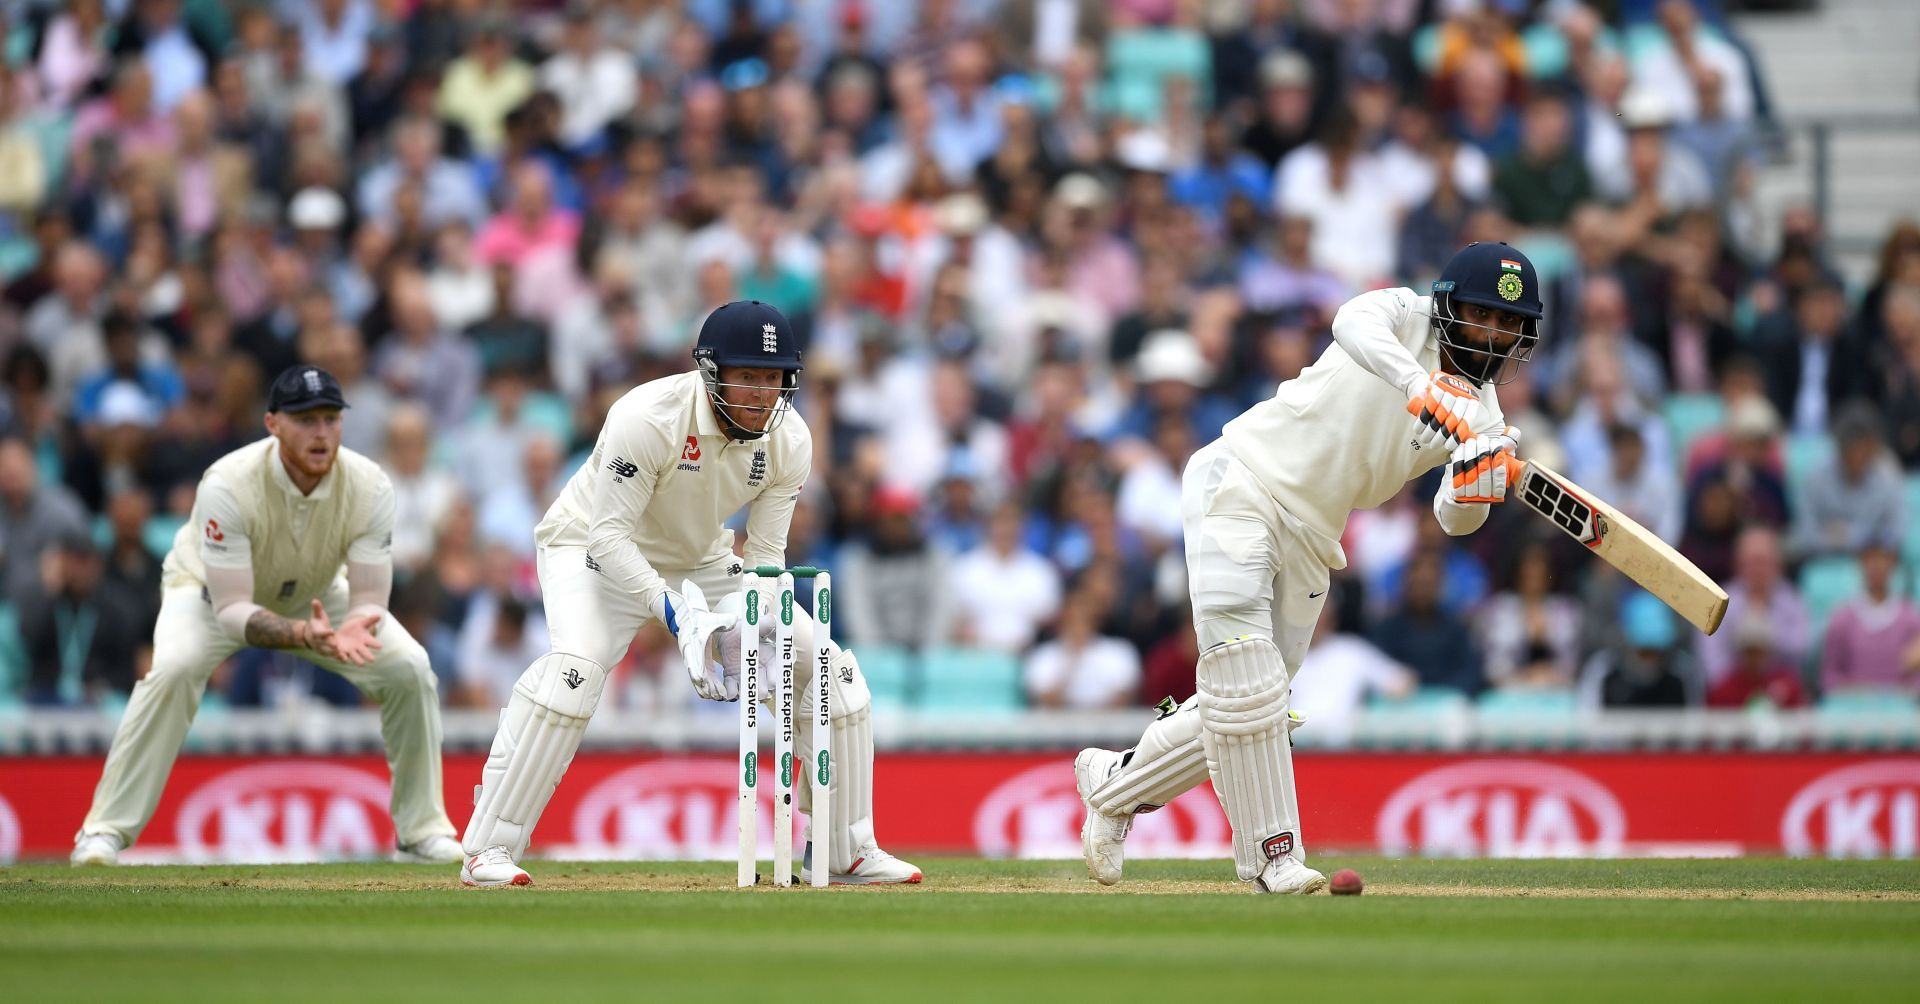 The southpaw batting during the 2018 Oval Test. (Pic: Getty Images)